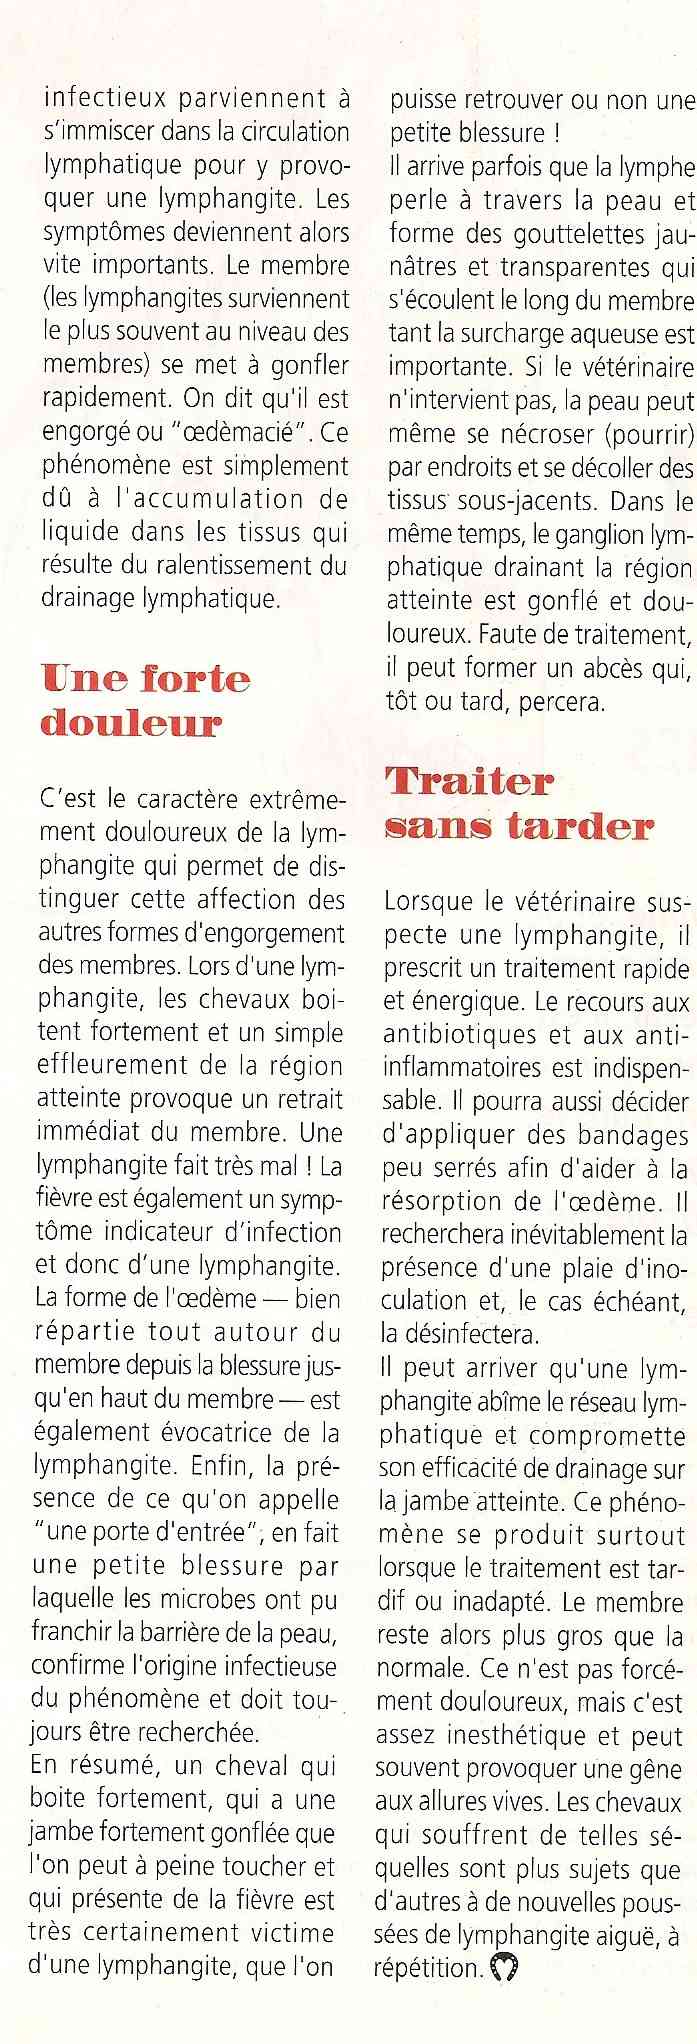 Cheval mag - les articles - Page 3 298-ly10